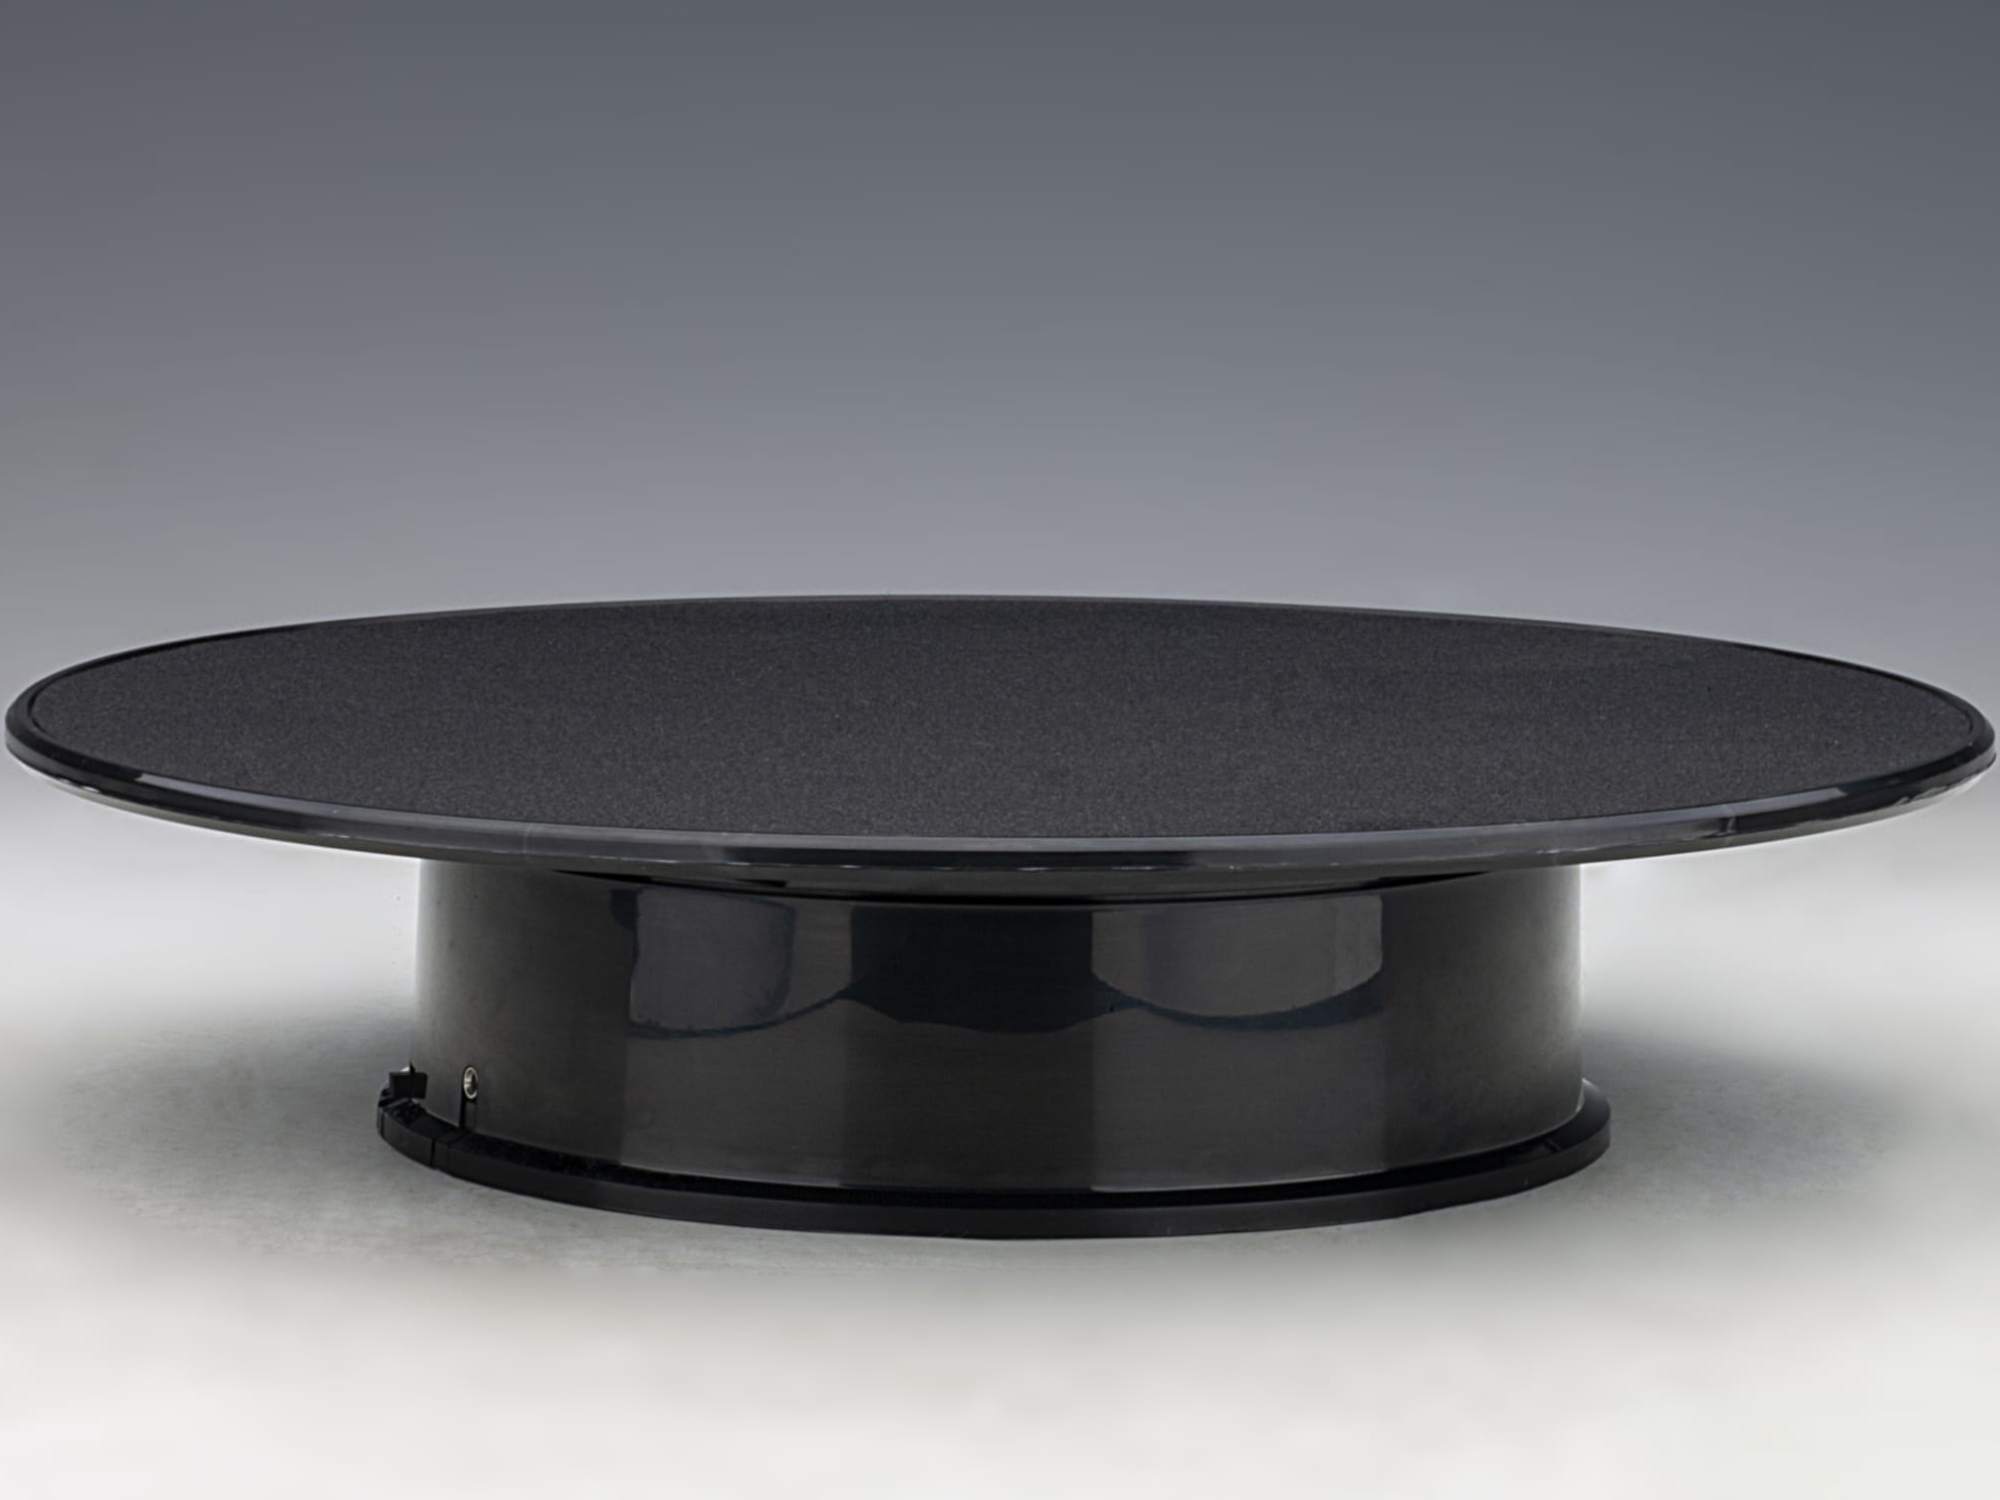 Autoart Rotary Display Turntable Stand Medium 10 Inches with Black Top for 1/64, 1/43, 1/32, 1/24, 1/18 Scale Models by Autoart